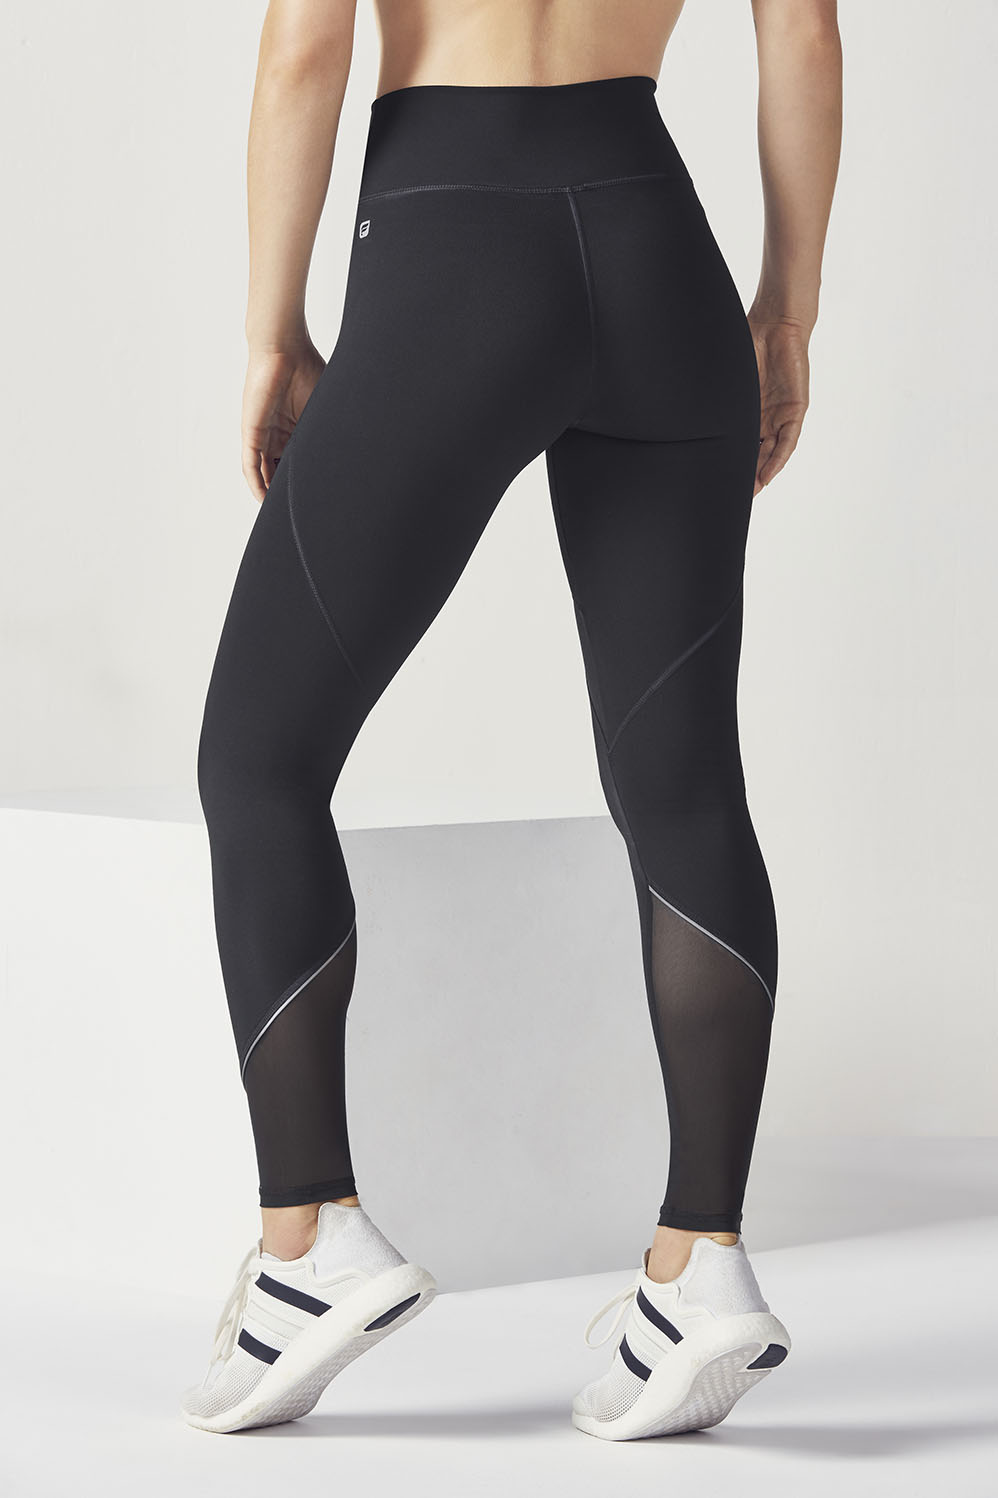 High-Waisted Mesh PowerHold Legging in Black/Silver - Get great deals ...